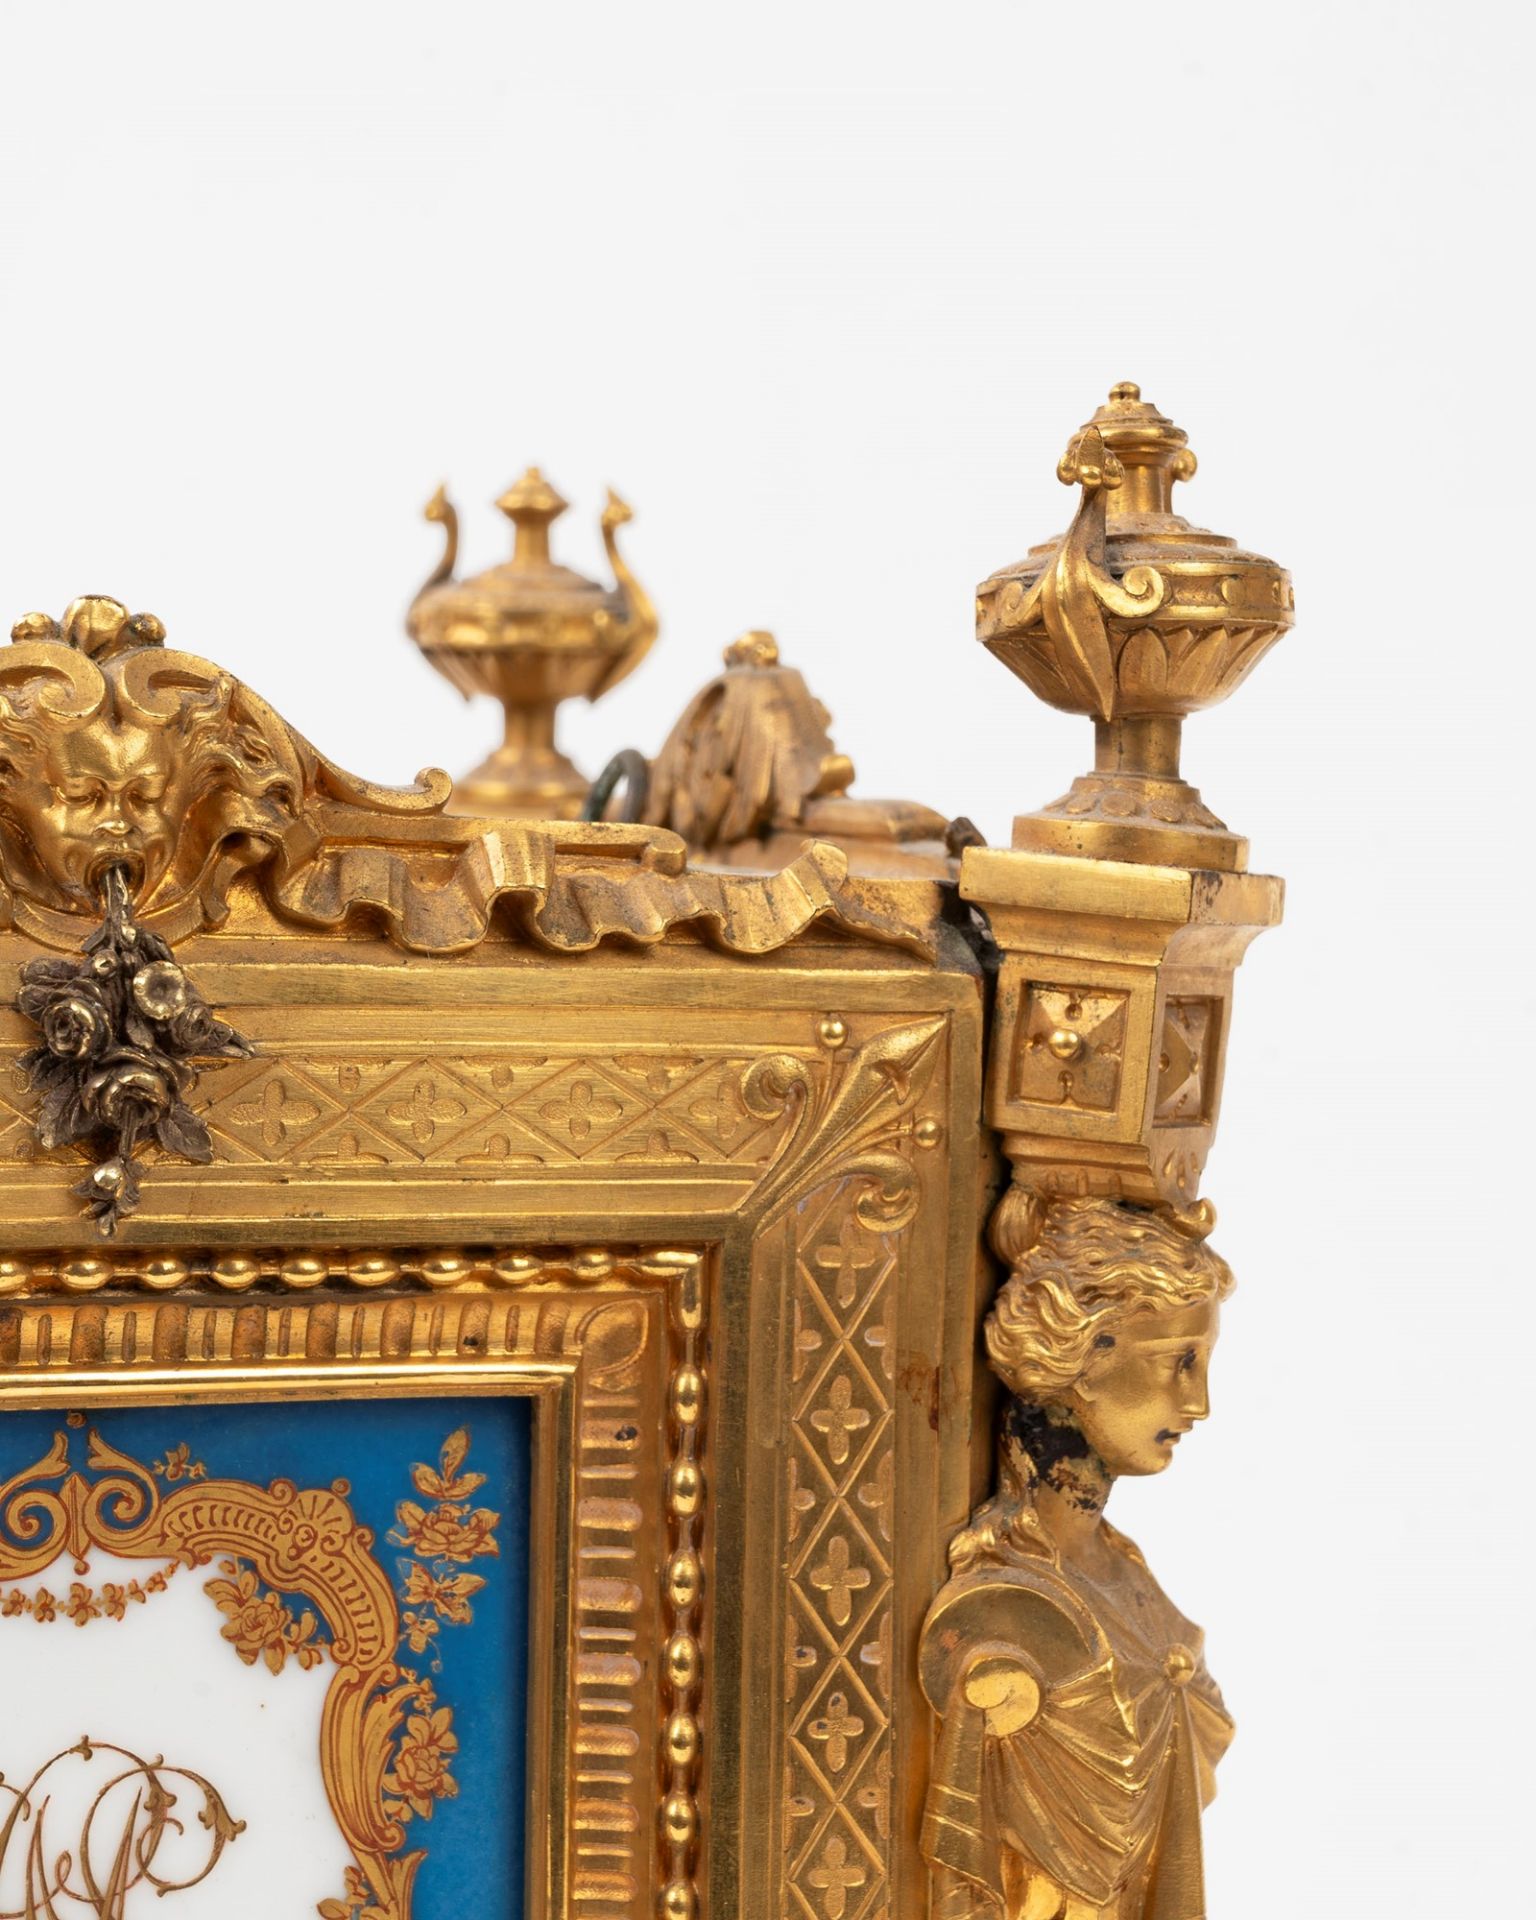 Important Napoleon III jardinier in gilded bronze and porcelain, France, 19th century - Image 5 of 7